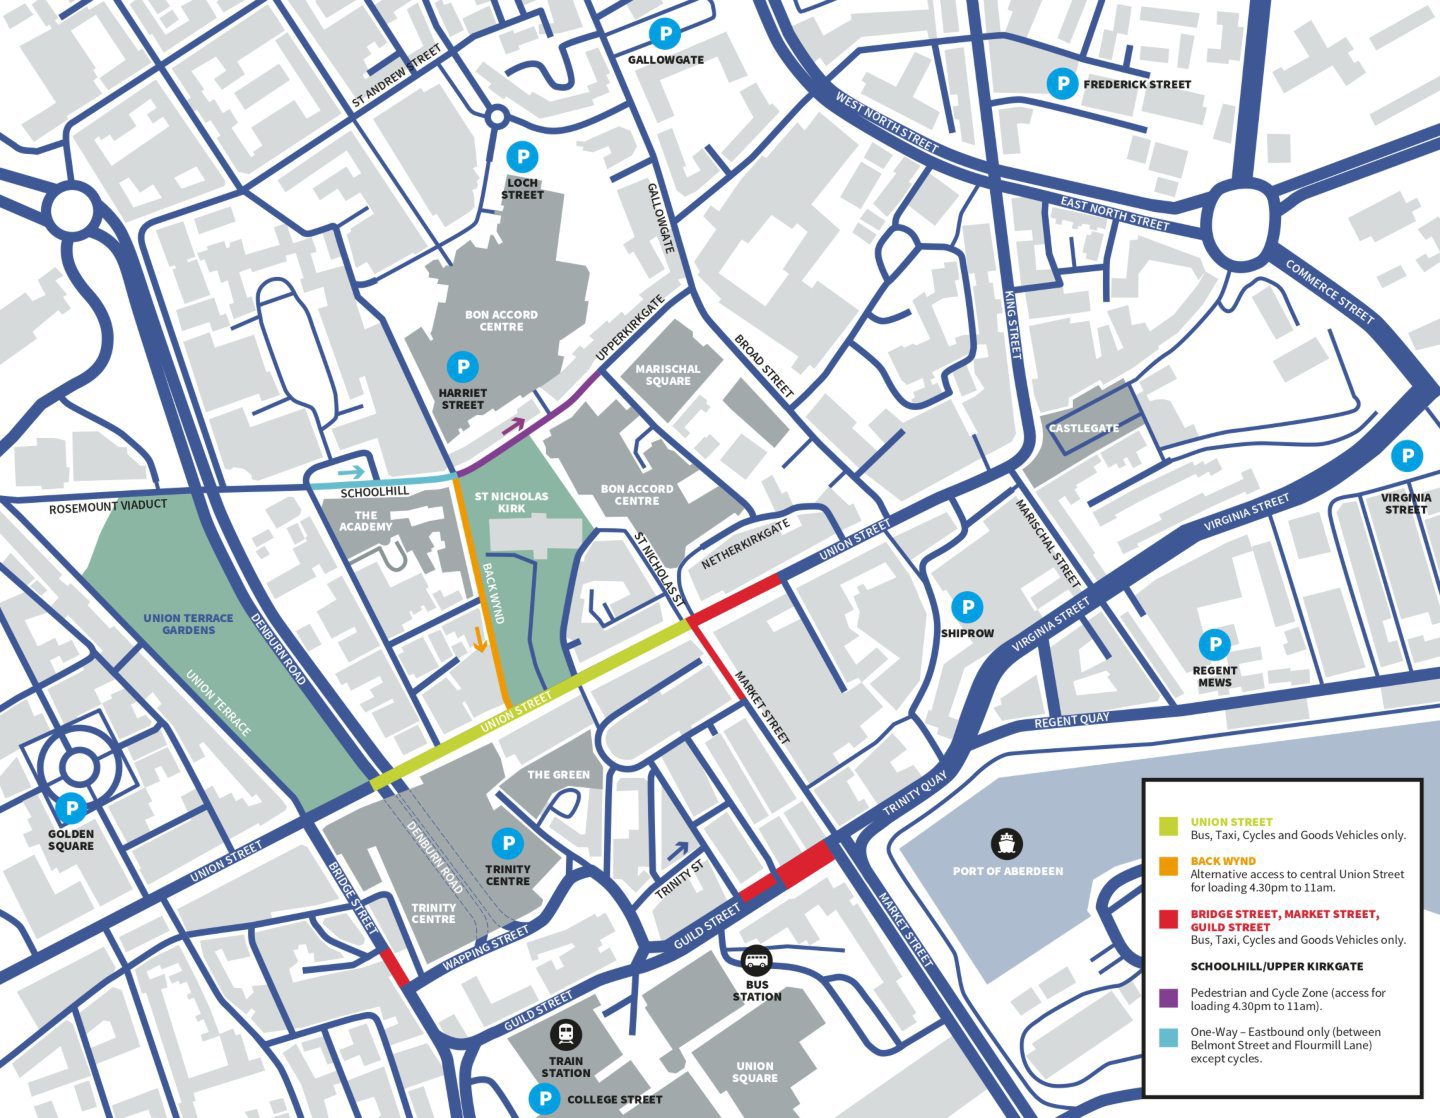 A map showing the bus priority route changes in Aberdeen city centre with colour-coding on the roads that have been changed